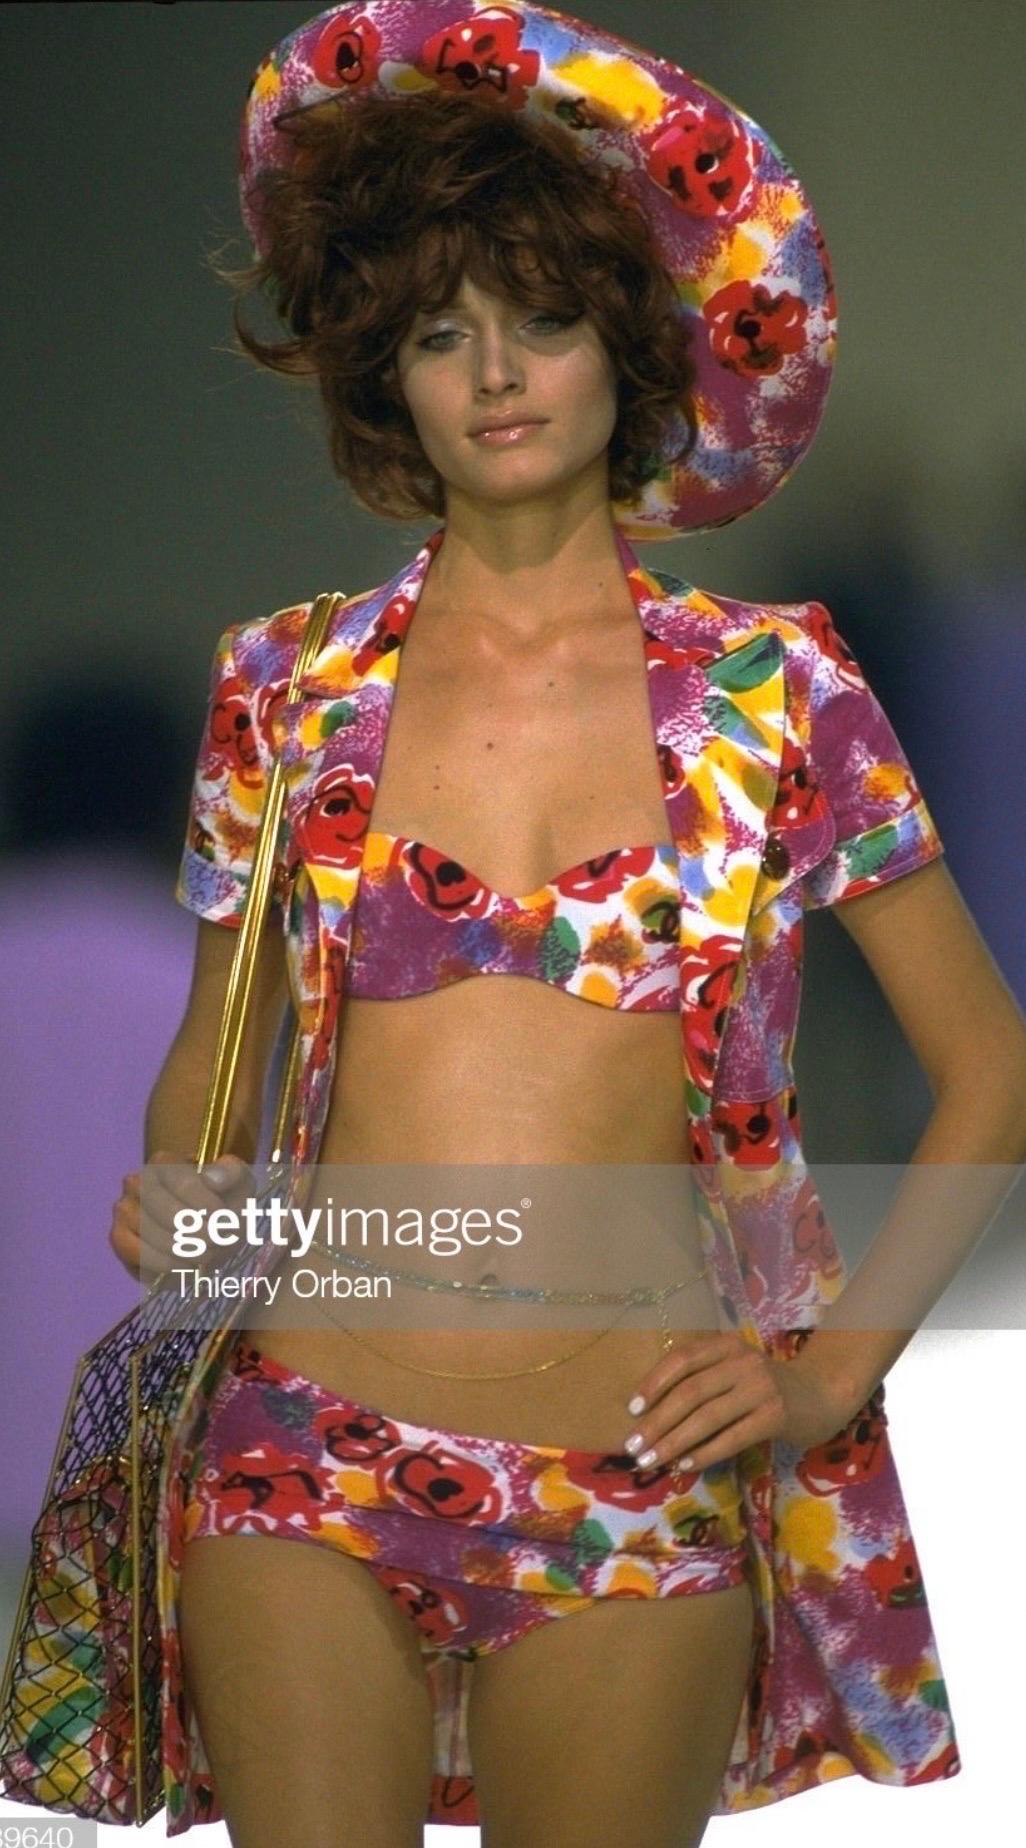  A stunning  cotton Chanel dress as seen on the runway of one of the most iconic Chanel RTW shows in the 1990s. 

Size FR 38

Measurements (flat lay on one side):

Shoulder to shoulder - 38 cm (15 in)
Armpit to armpit - 40 cm (16 in)
Waist - 34 cm